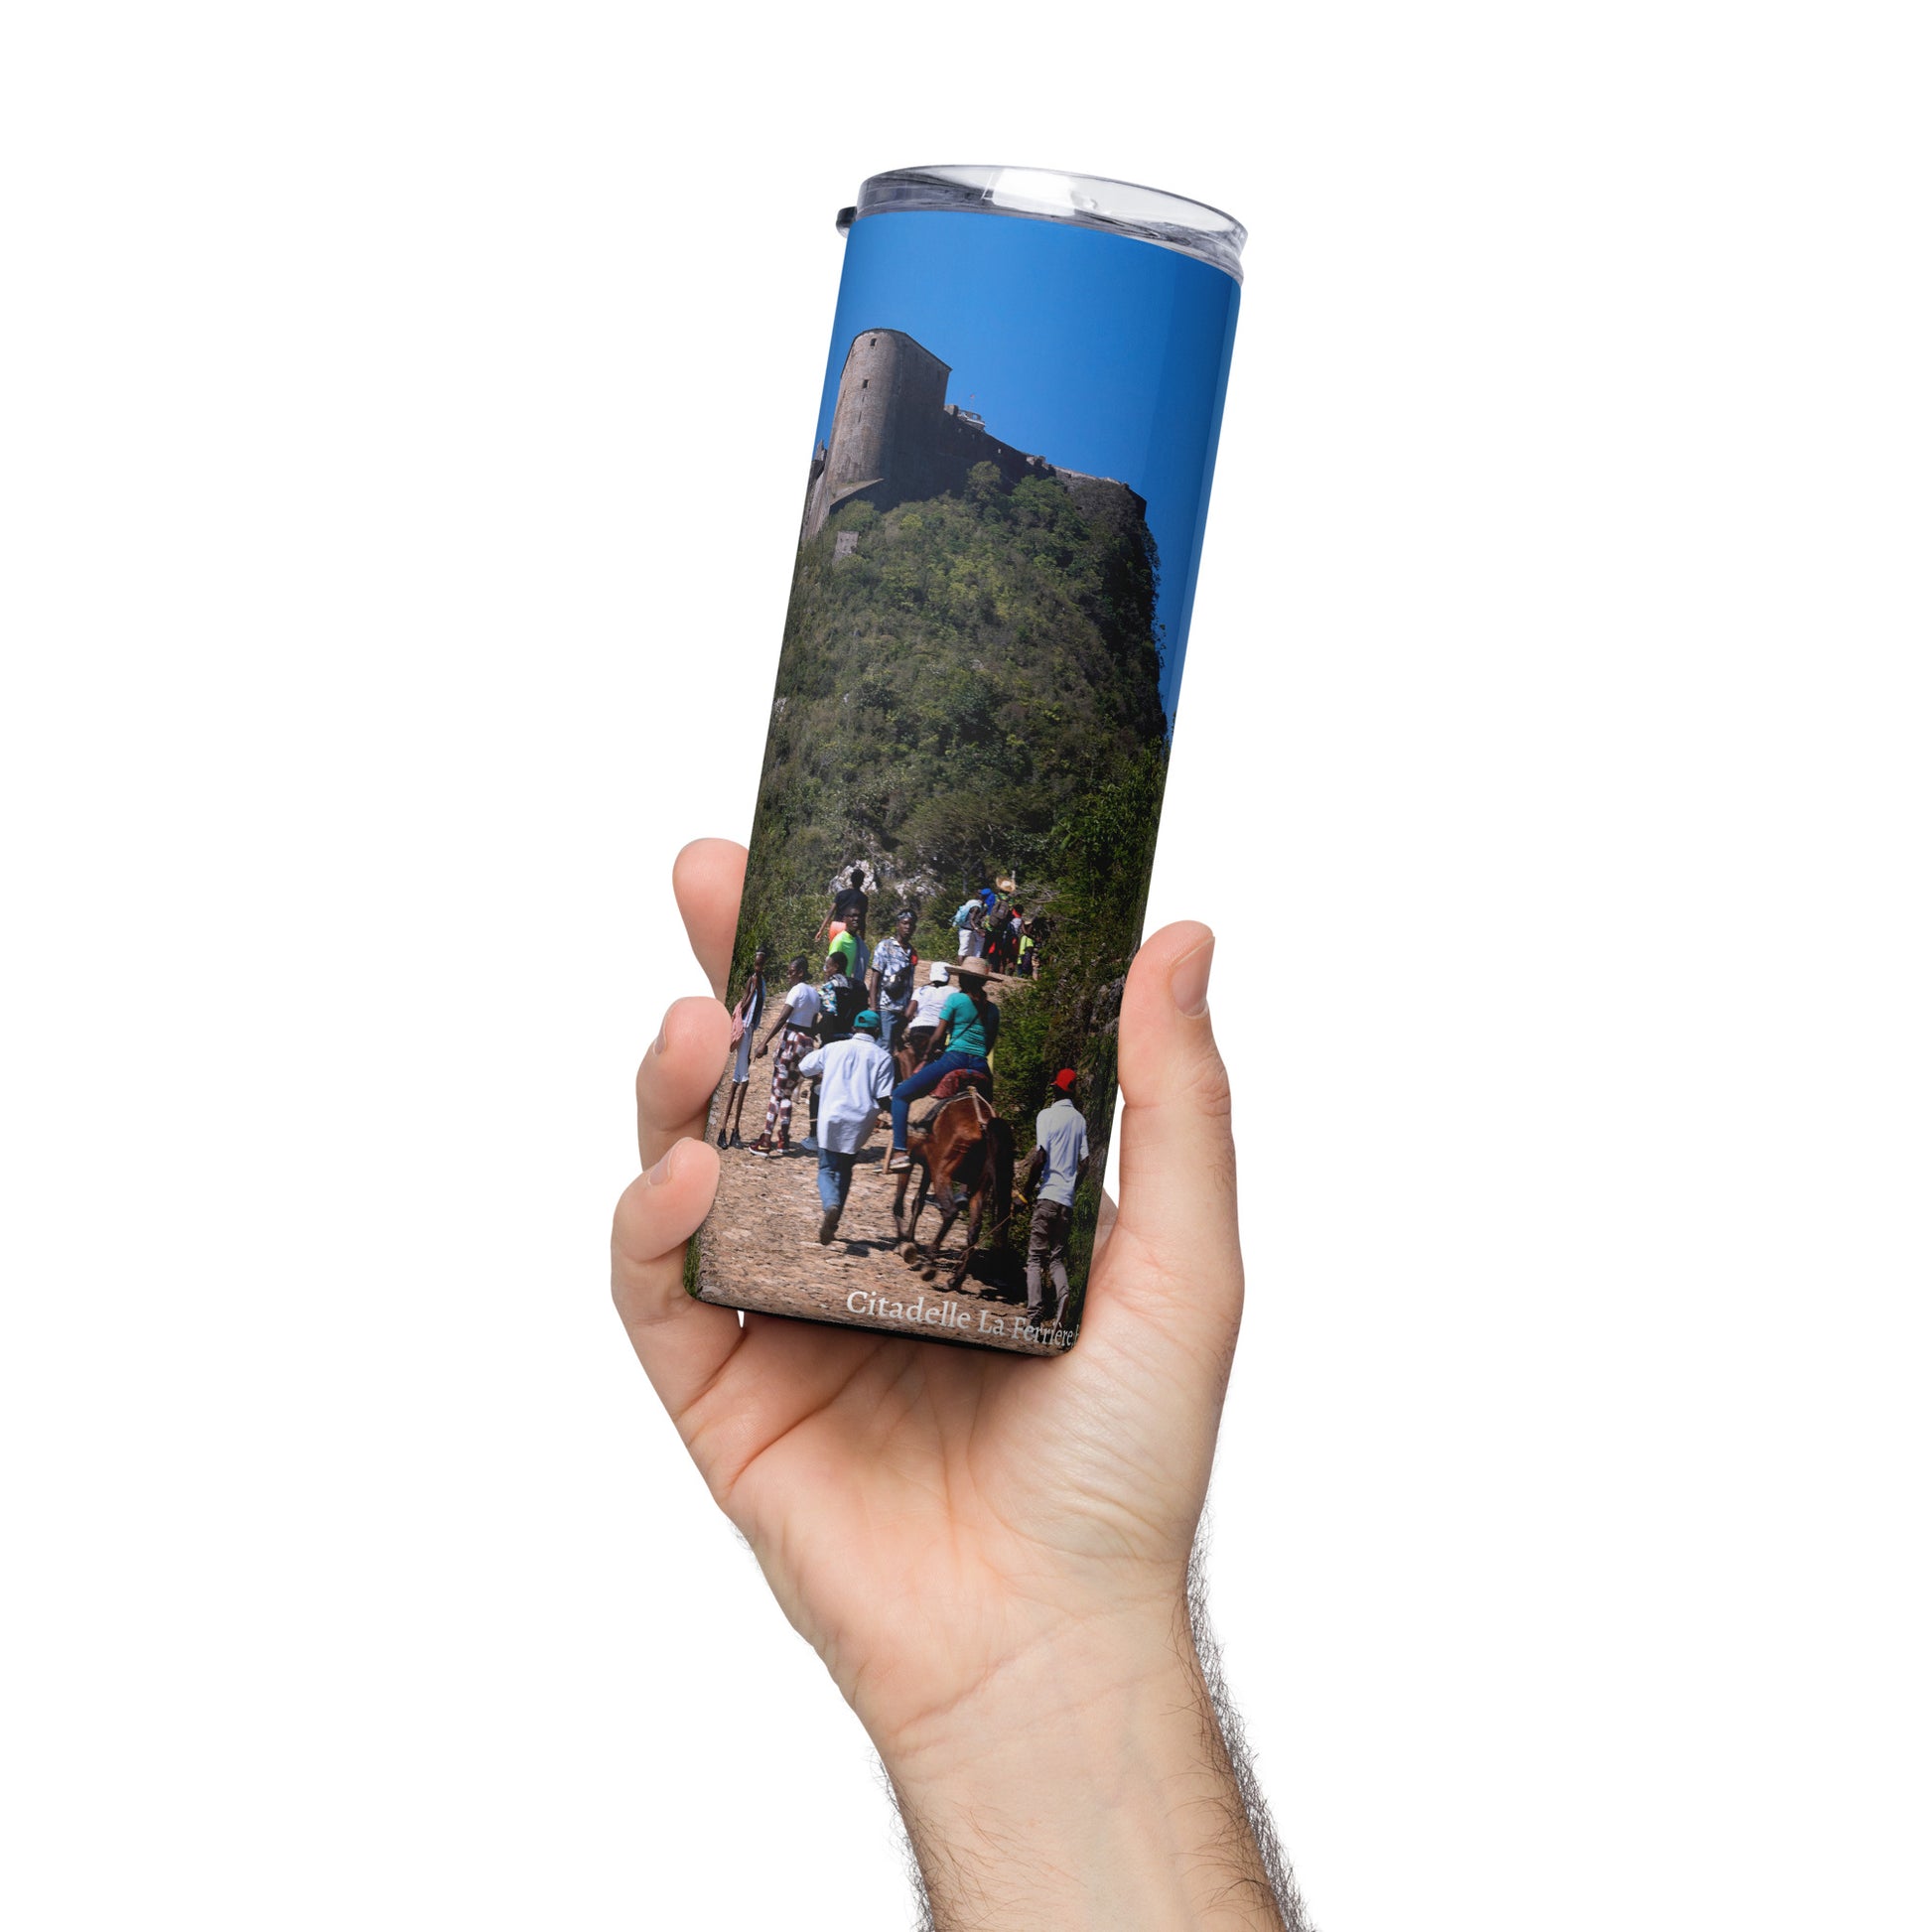 Stainless steel tumbler- Citadelle La Ferrière-Haïti-Tumbler-Goblet-Theo gallery expo-Theo photography